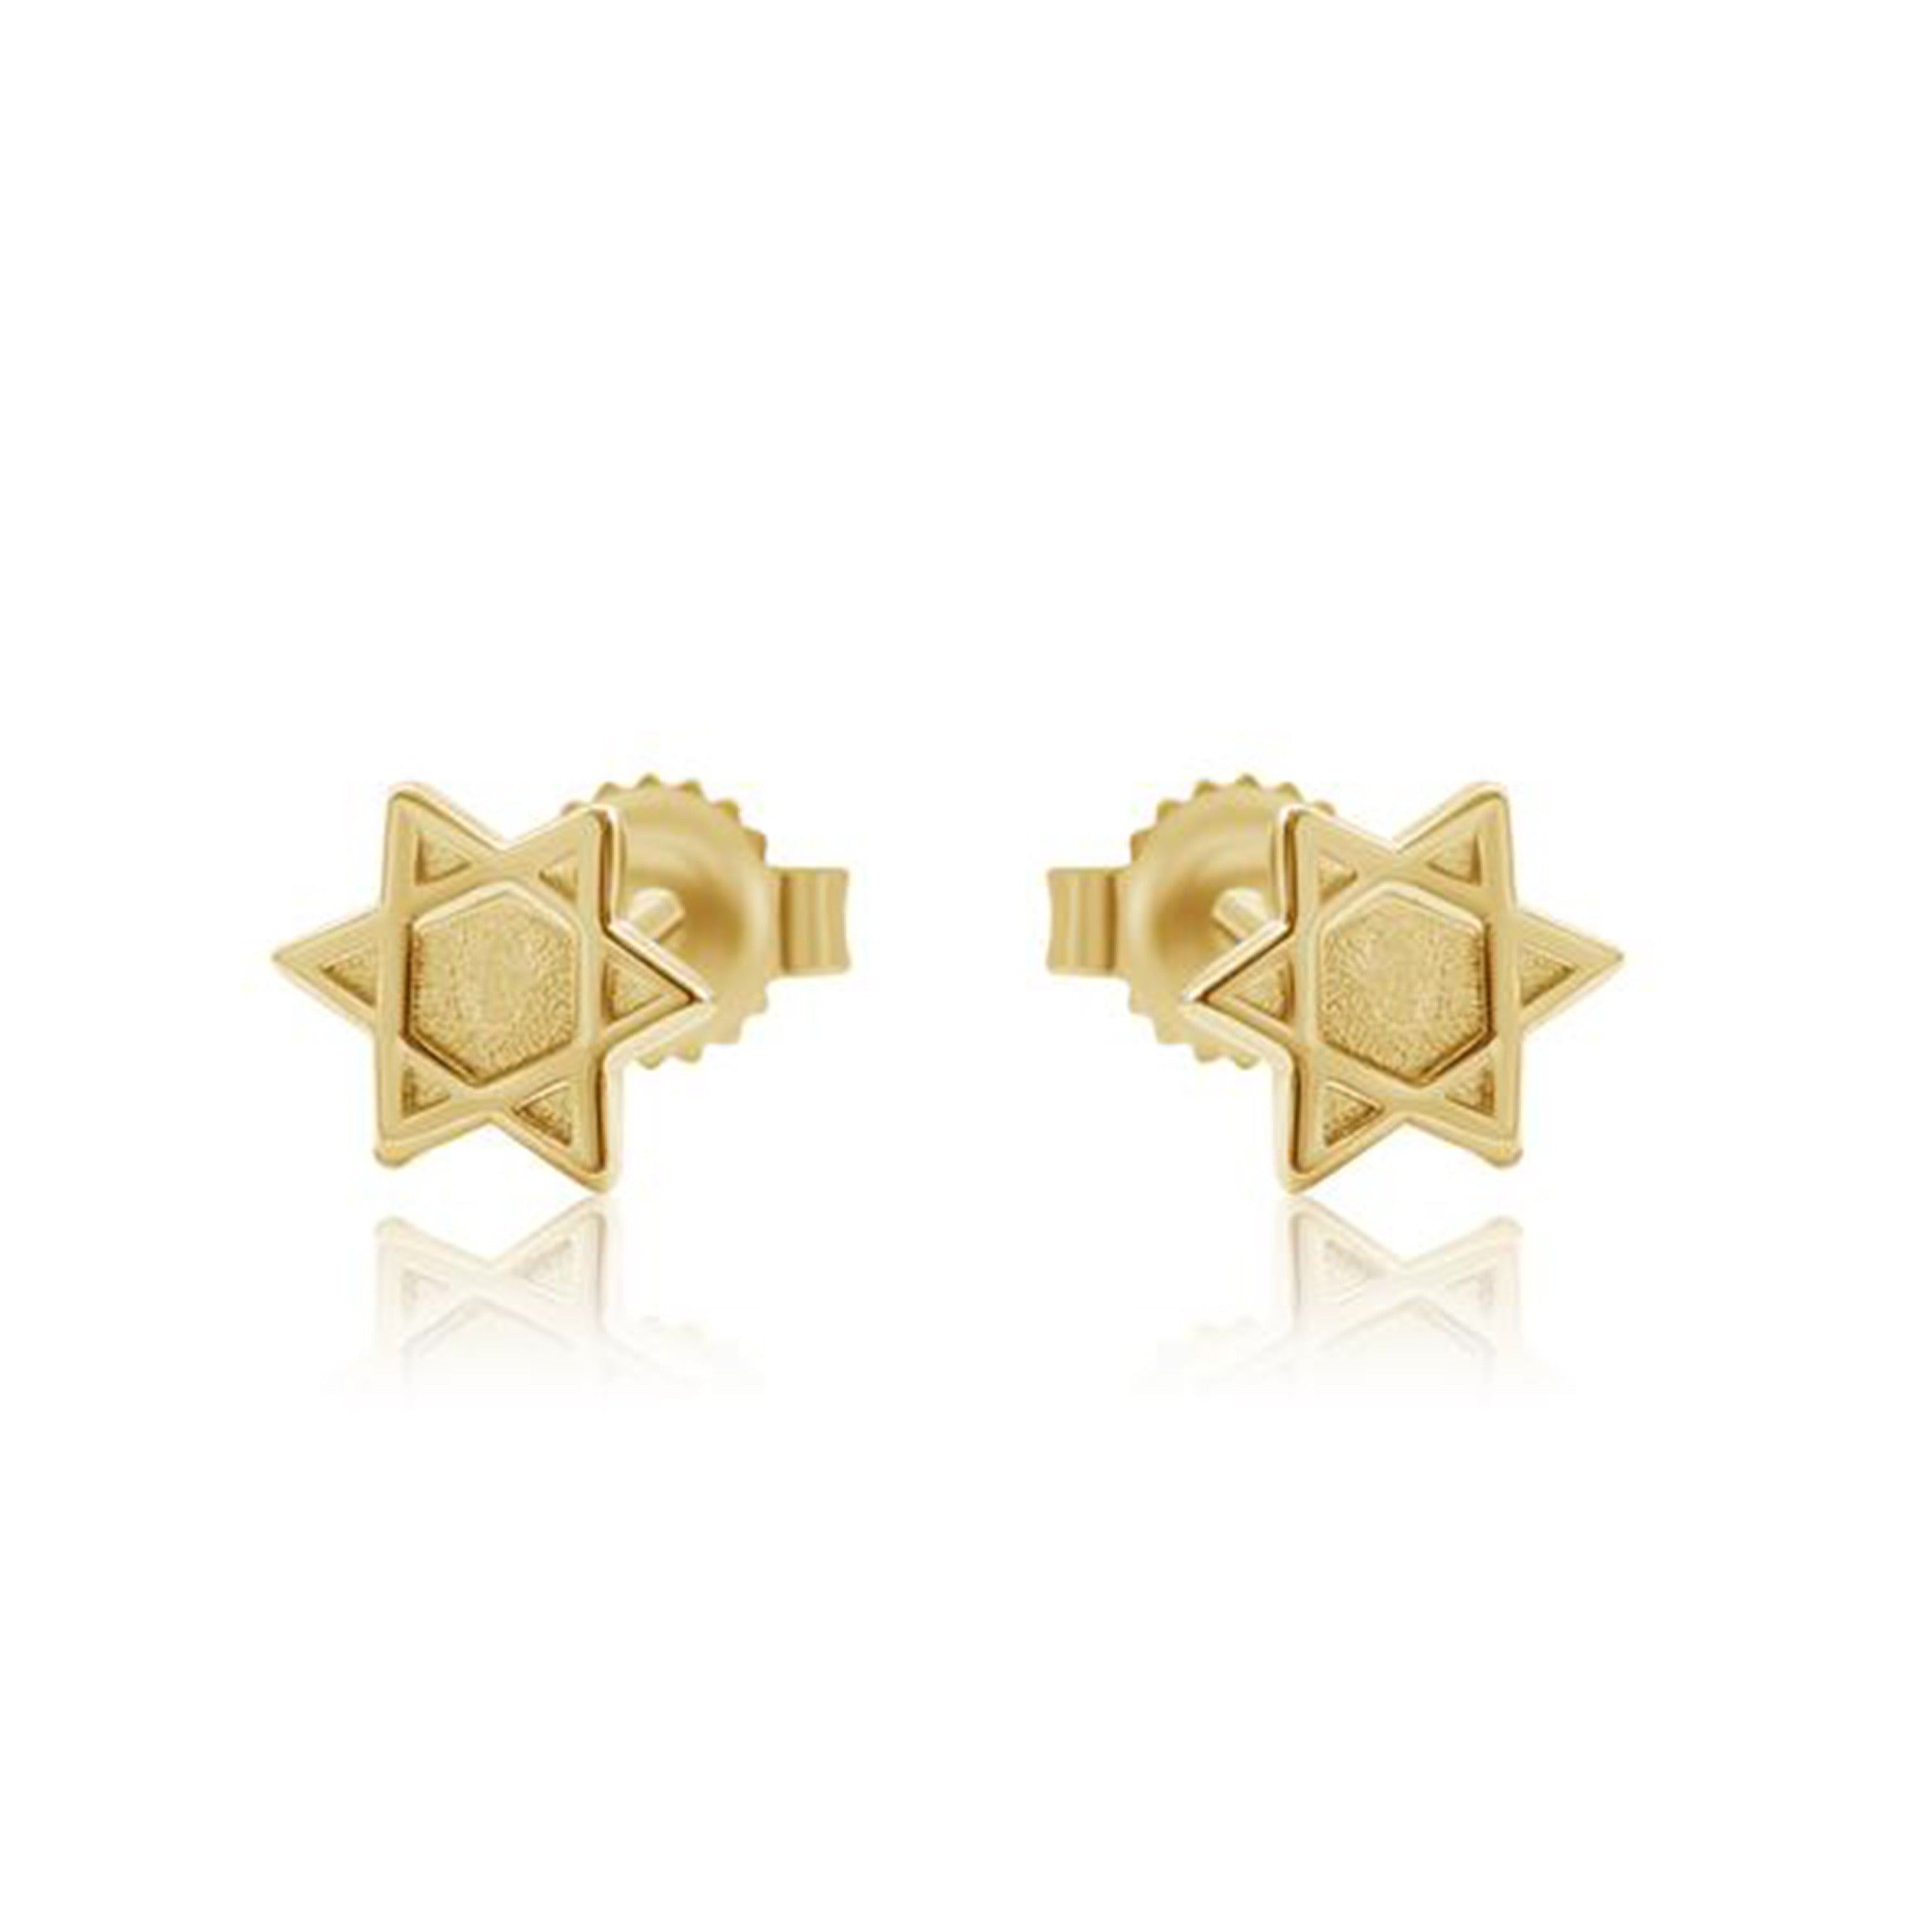 Mix and Match Earrings in 14k Gold - Alef Bet Jewelry by Paula